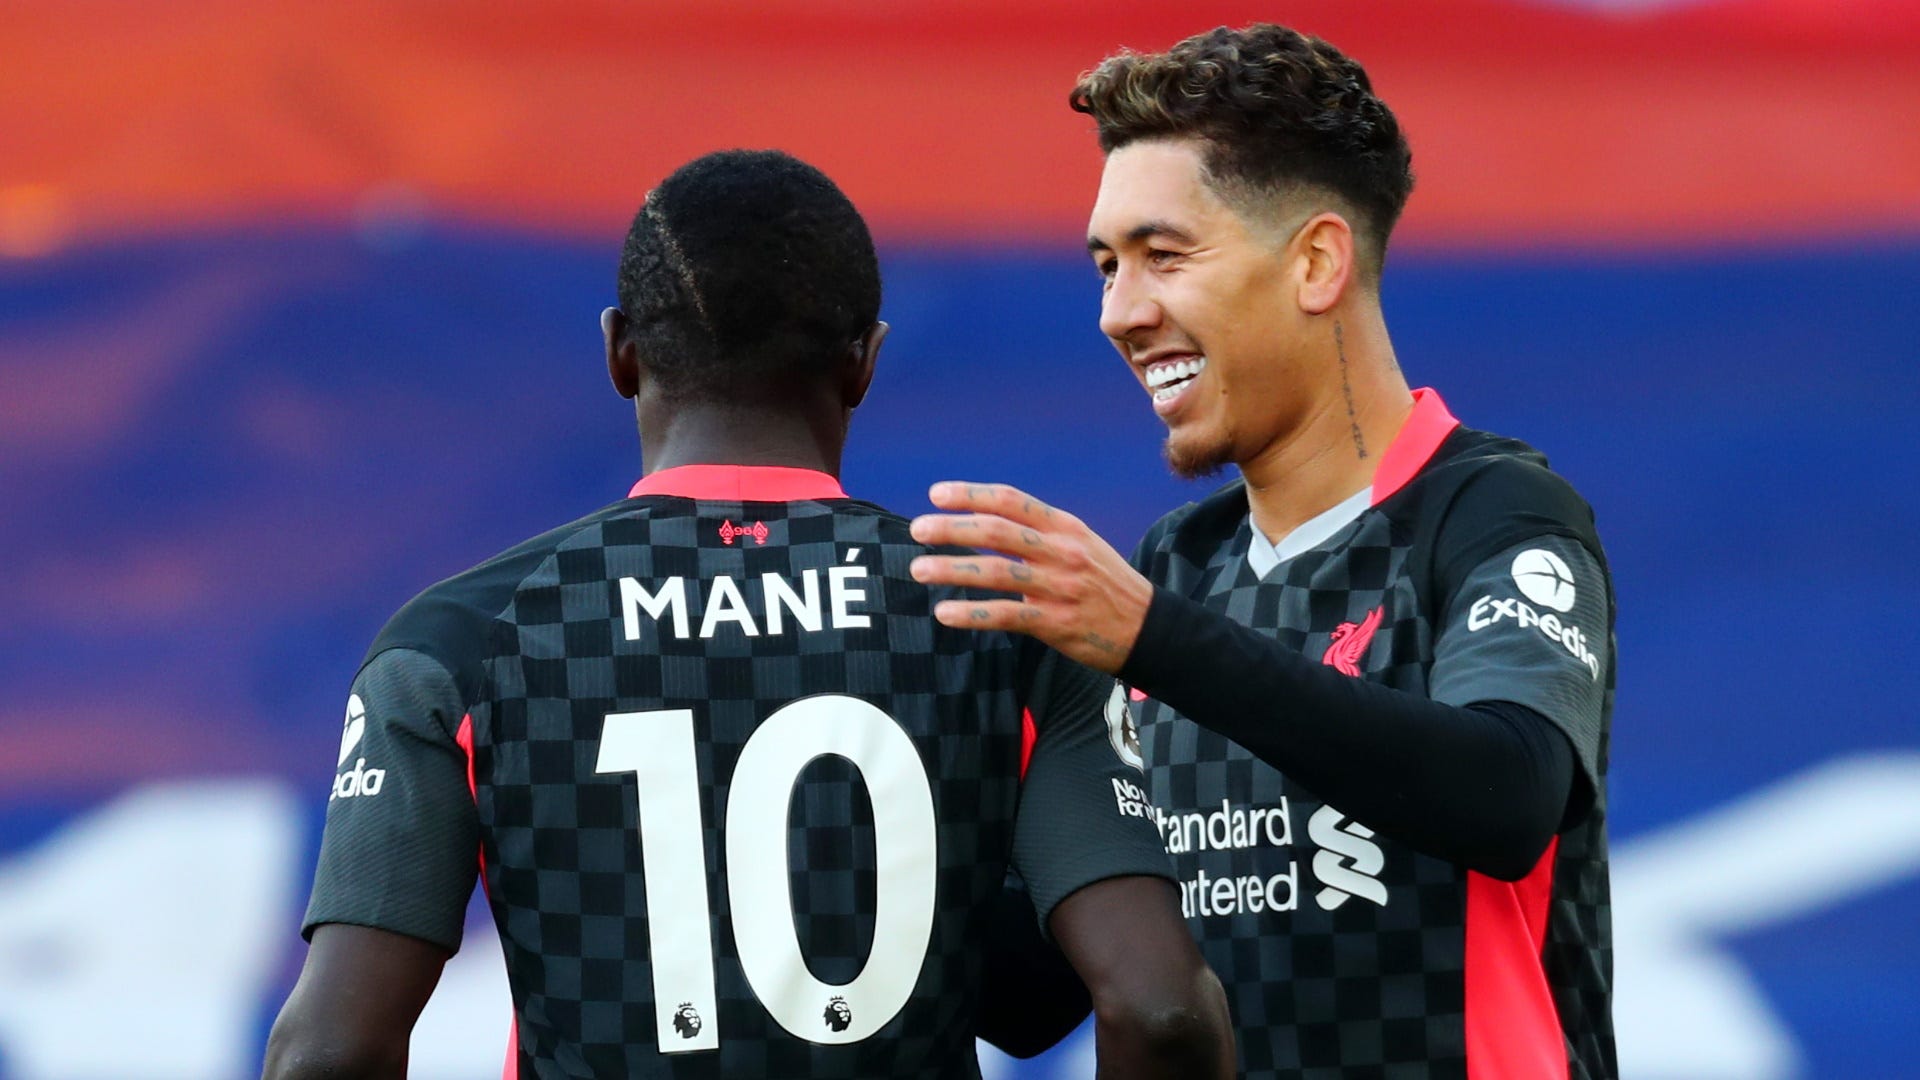 'If Mane or Firmino went somewhere else they would be exhilarating' - Liverpool warned off front three sales by Crouch